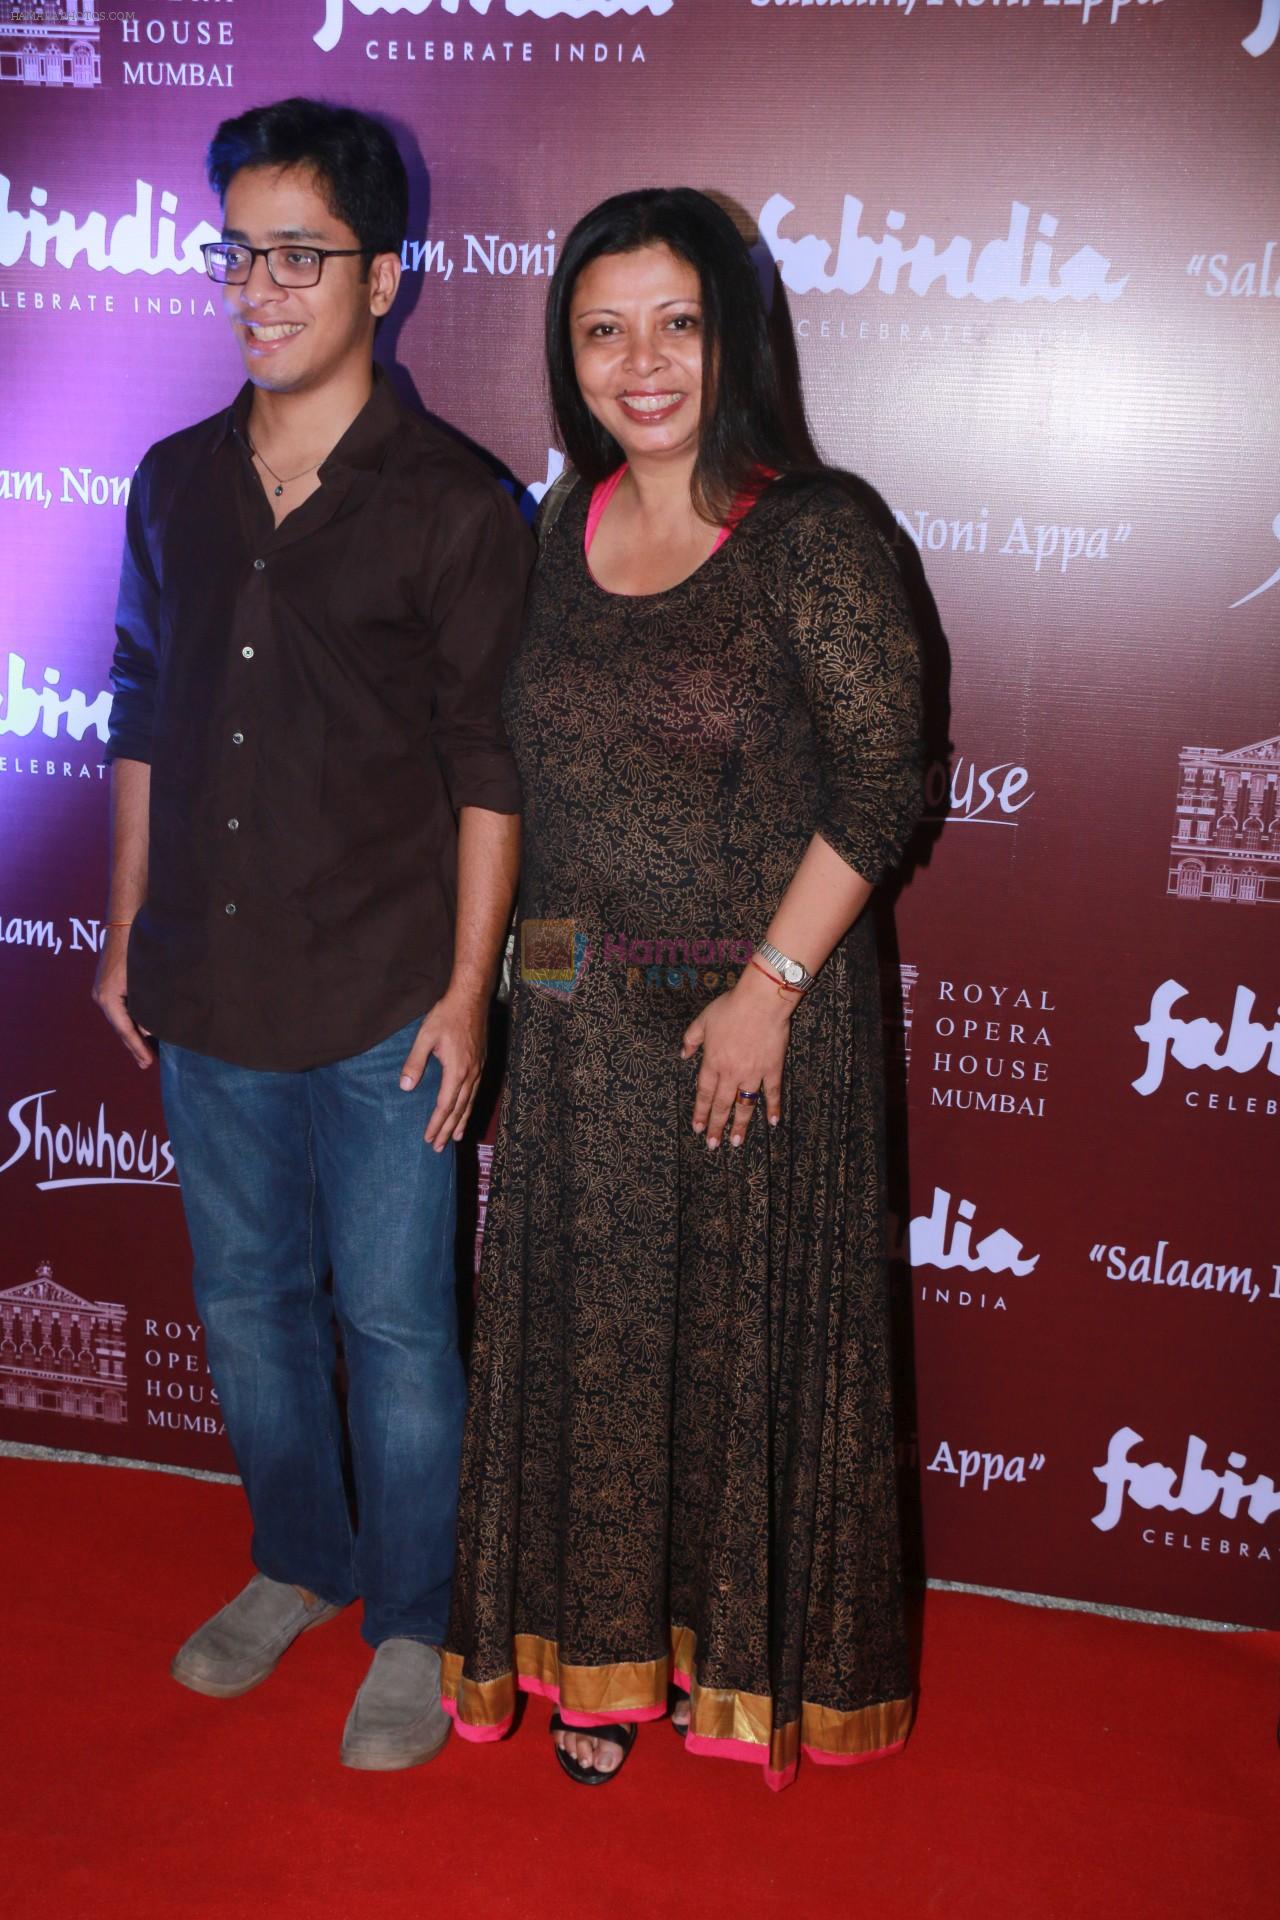 Nandita Puri, Ishaan Puri at the Special preview of Salaam Noni Appa based on Twinkle Khanna's novel at Royal Opera House in mumbai on 28th Oct 2017